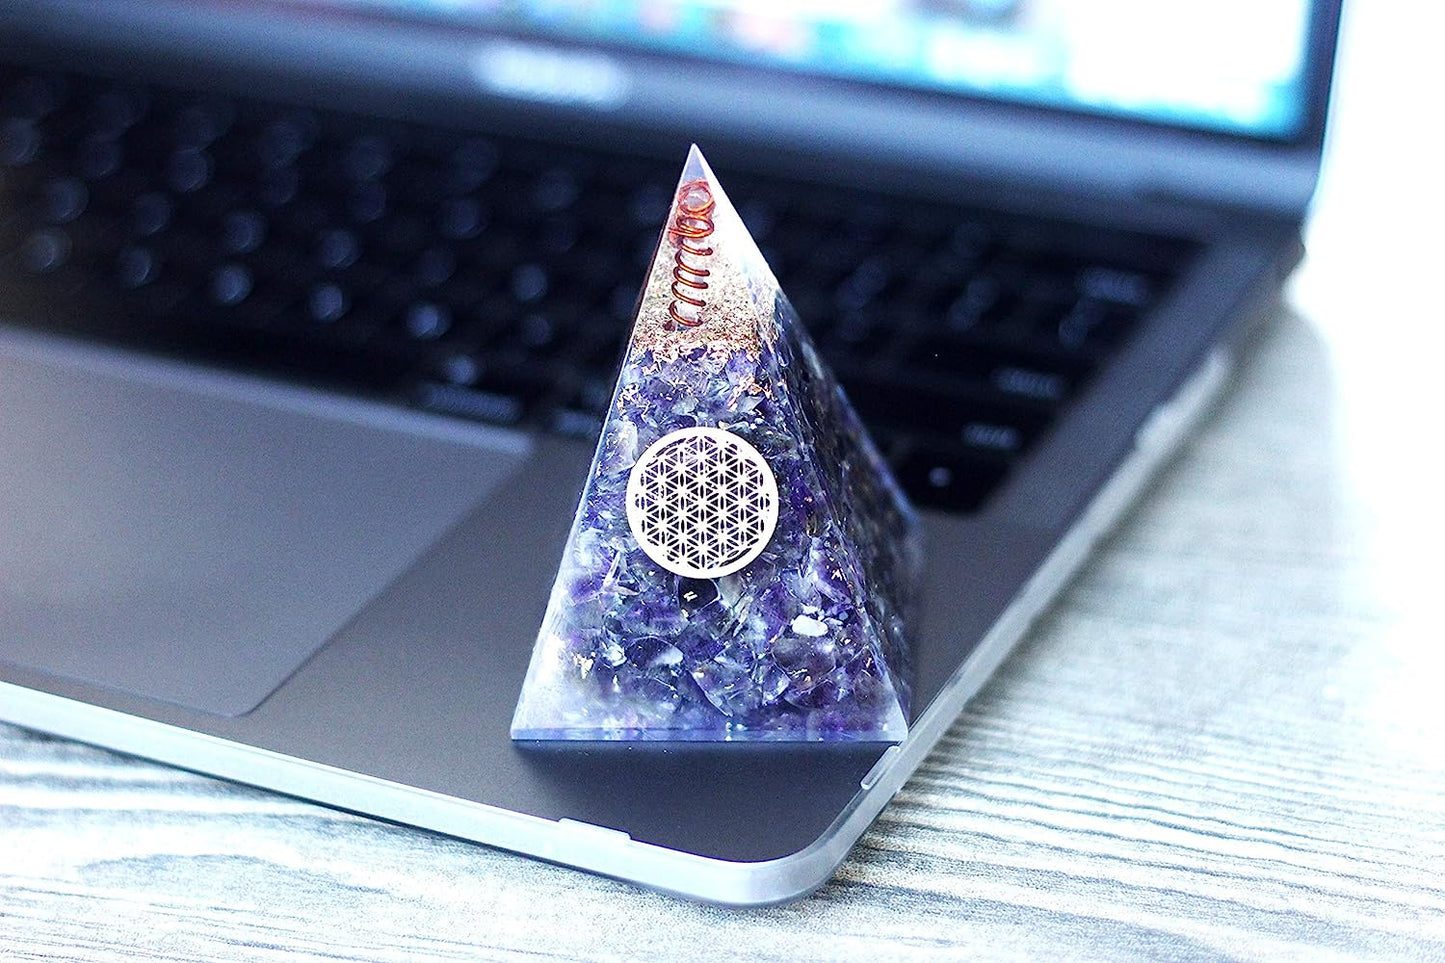 Amethyst Nubian Orgonite Pyramid With Clear Quartz Crystal And Copper Coil